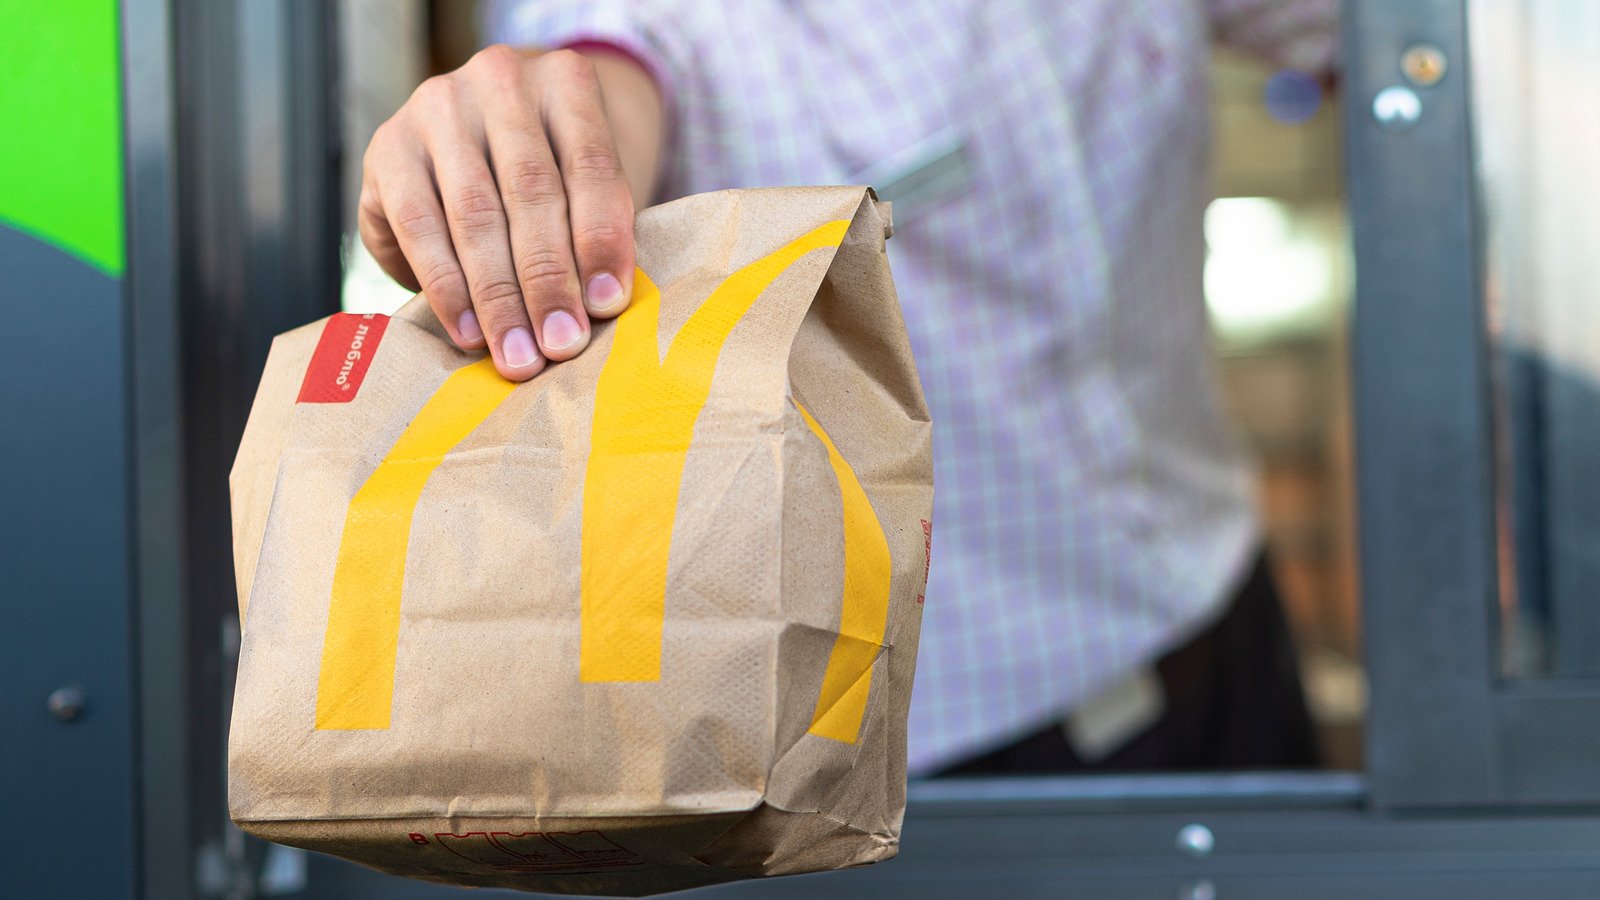 Popular McDonald's Menu Items, Ranked Worst To Best - Mashed